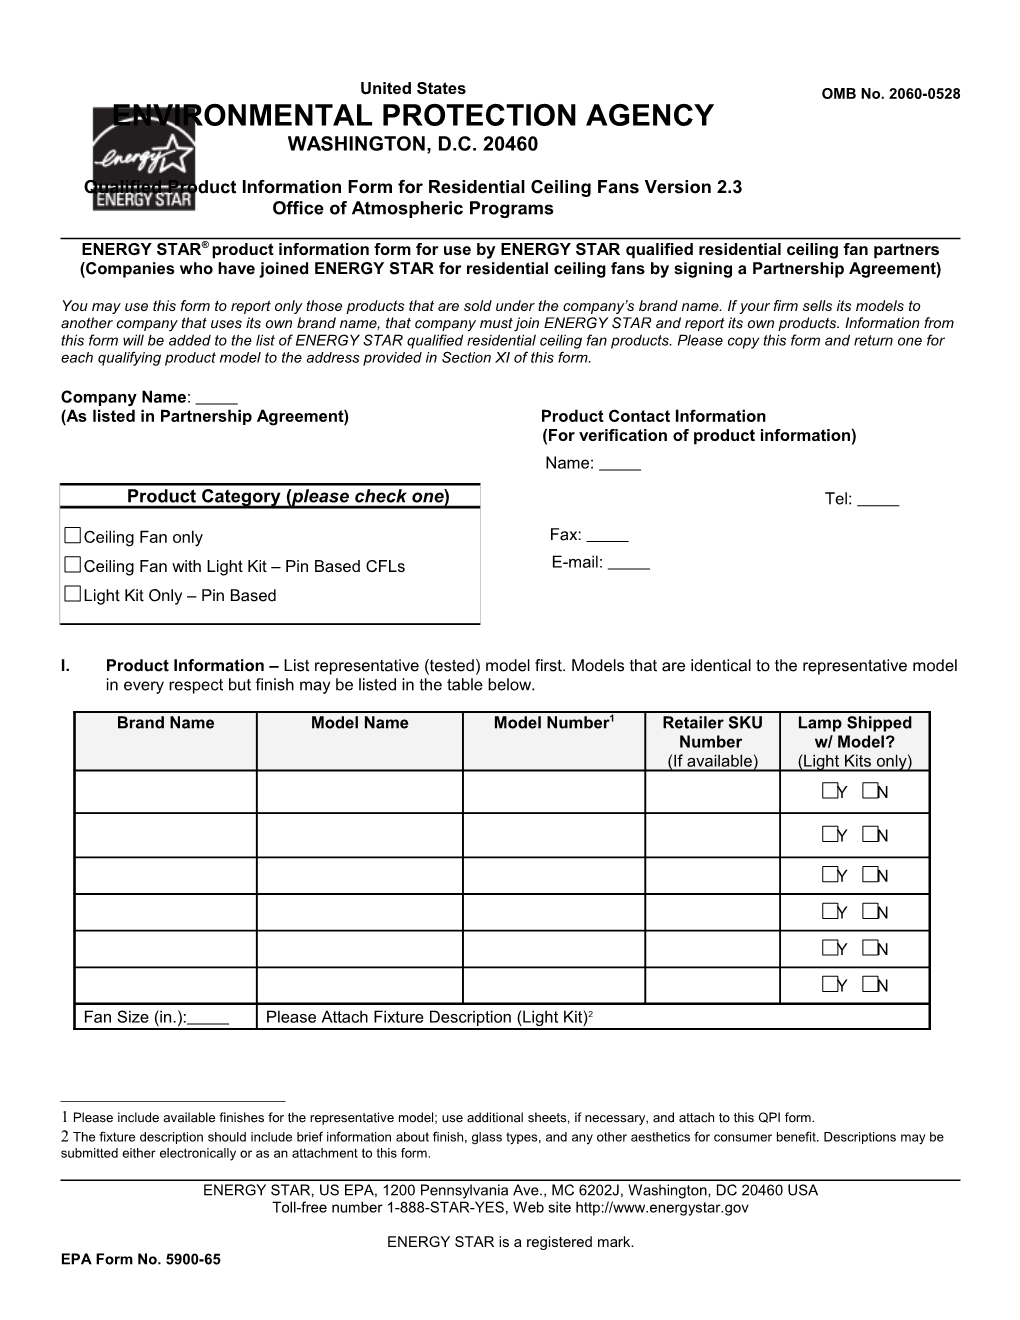 Qualified Product Information Form for Residential Ceiling Fans Version 2.3